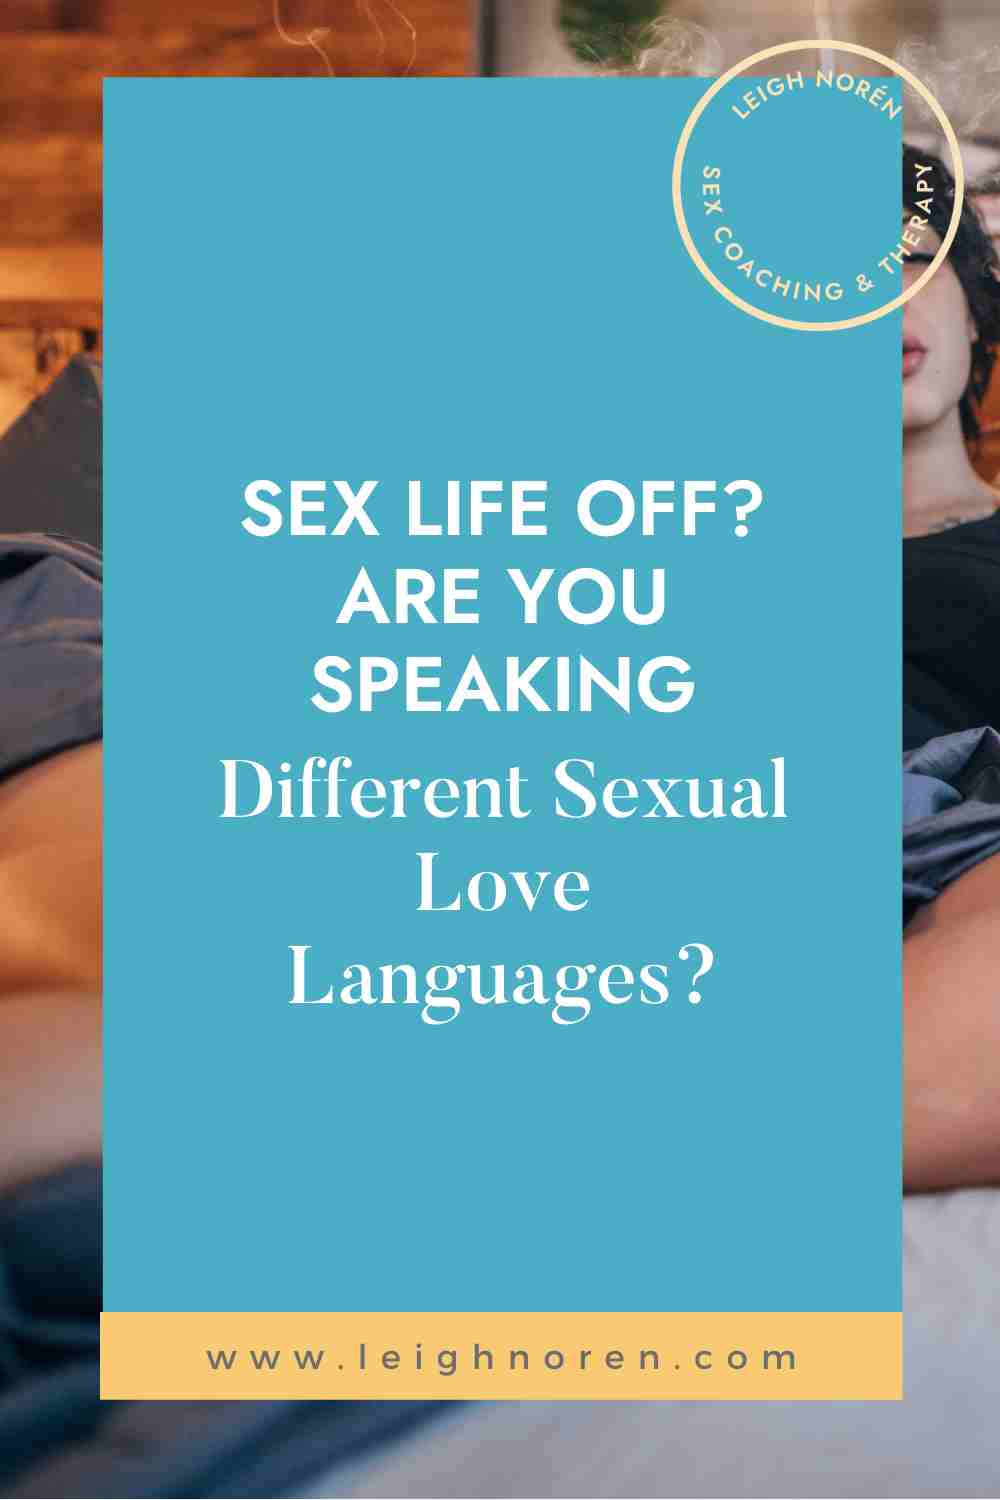 Sex Life Off? Are You Speaking Different Sexual Love Languages?